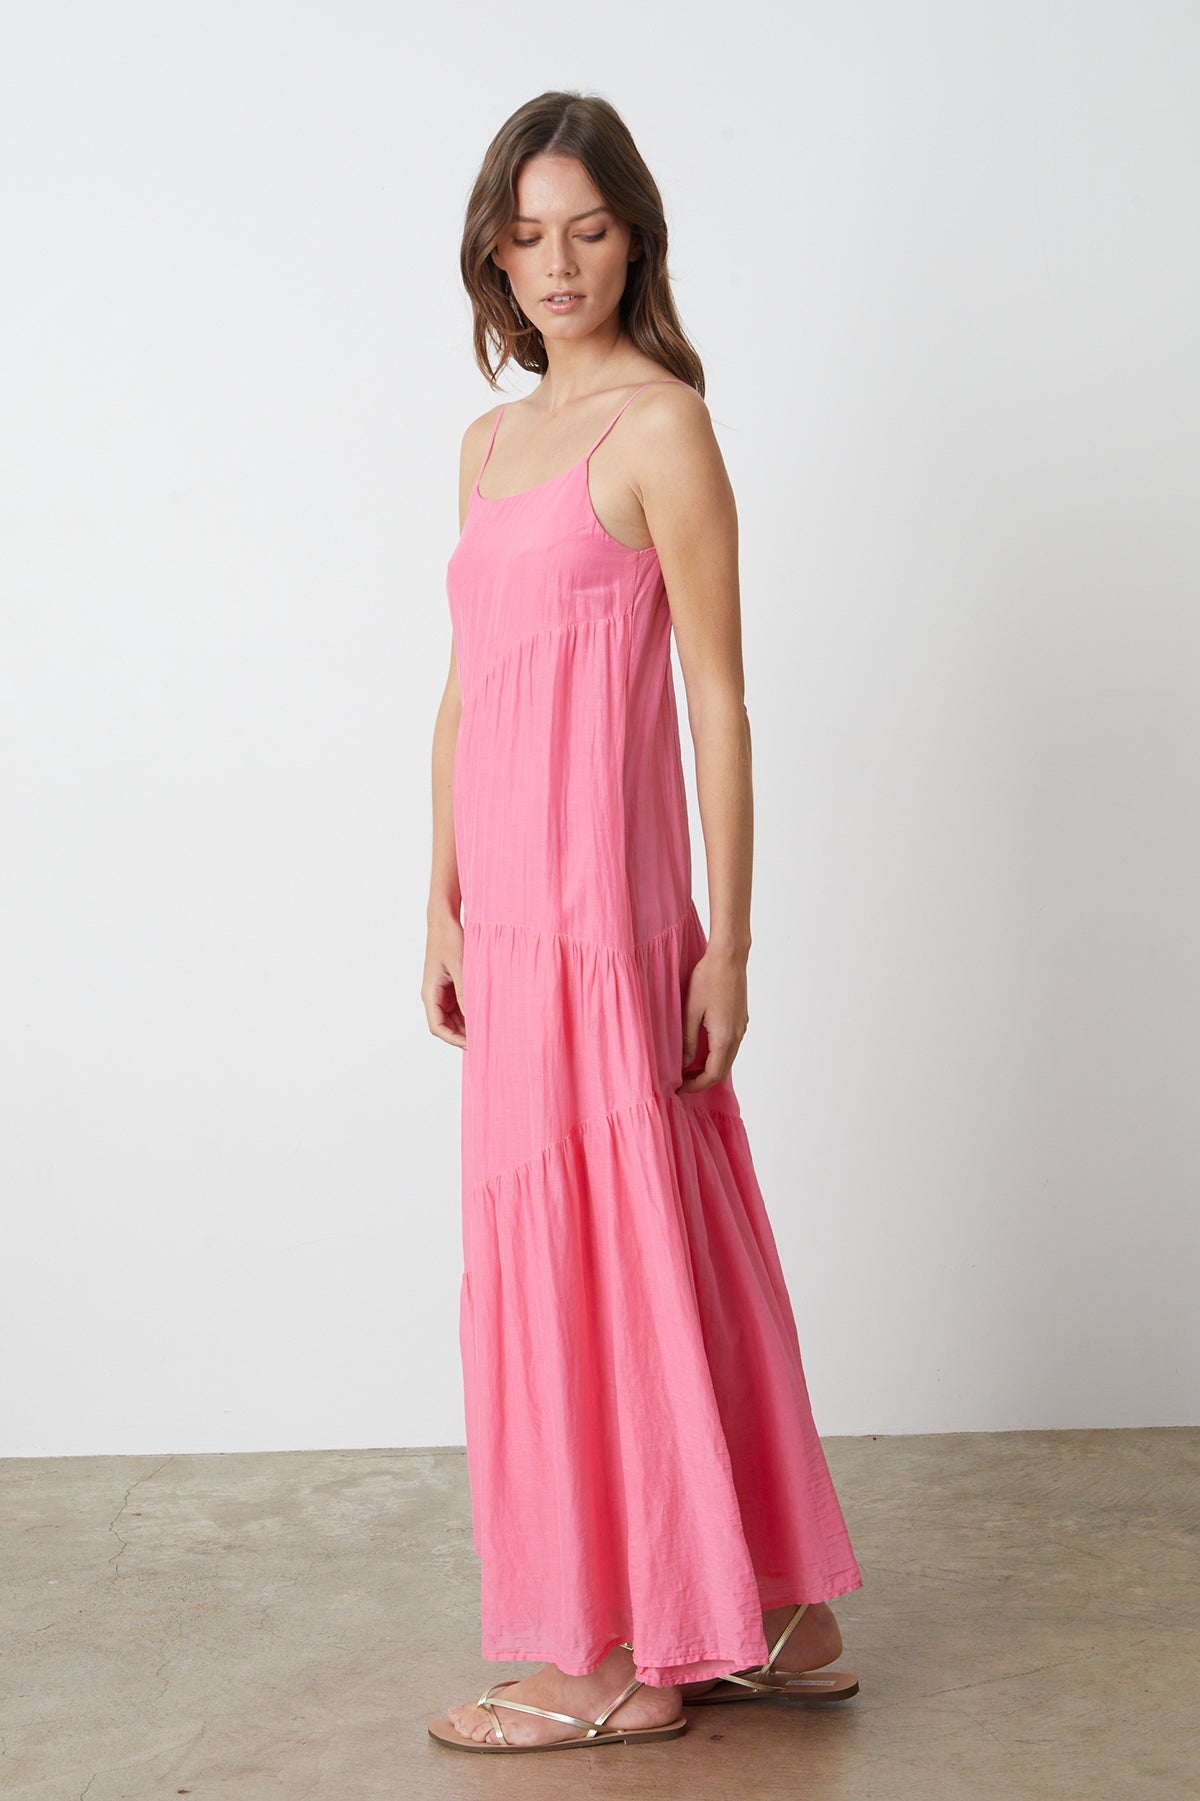   The model is wearing a pink Velvet by Graham & Spencer BILLIE TIERED MAXI DRESS. 